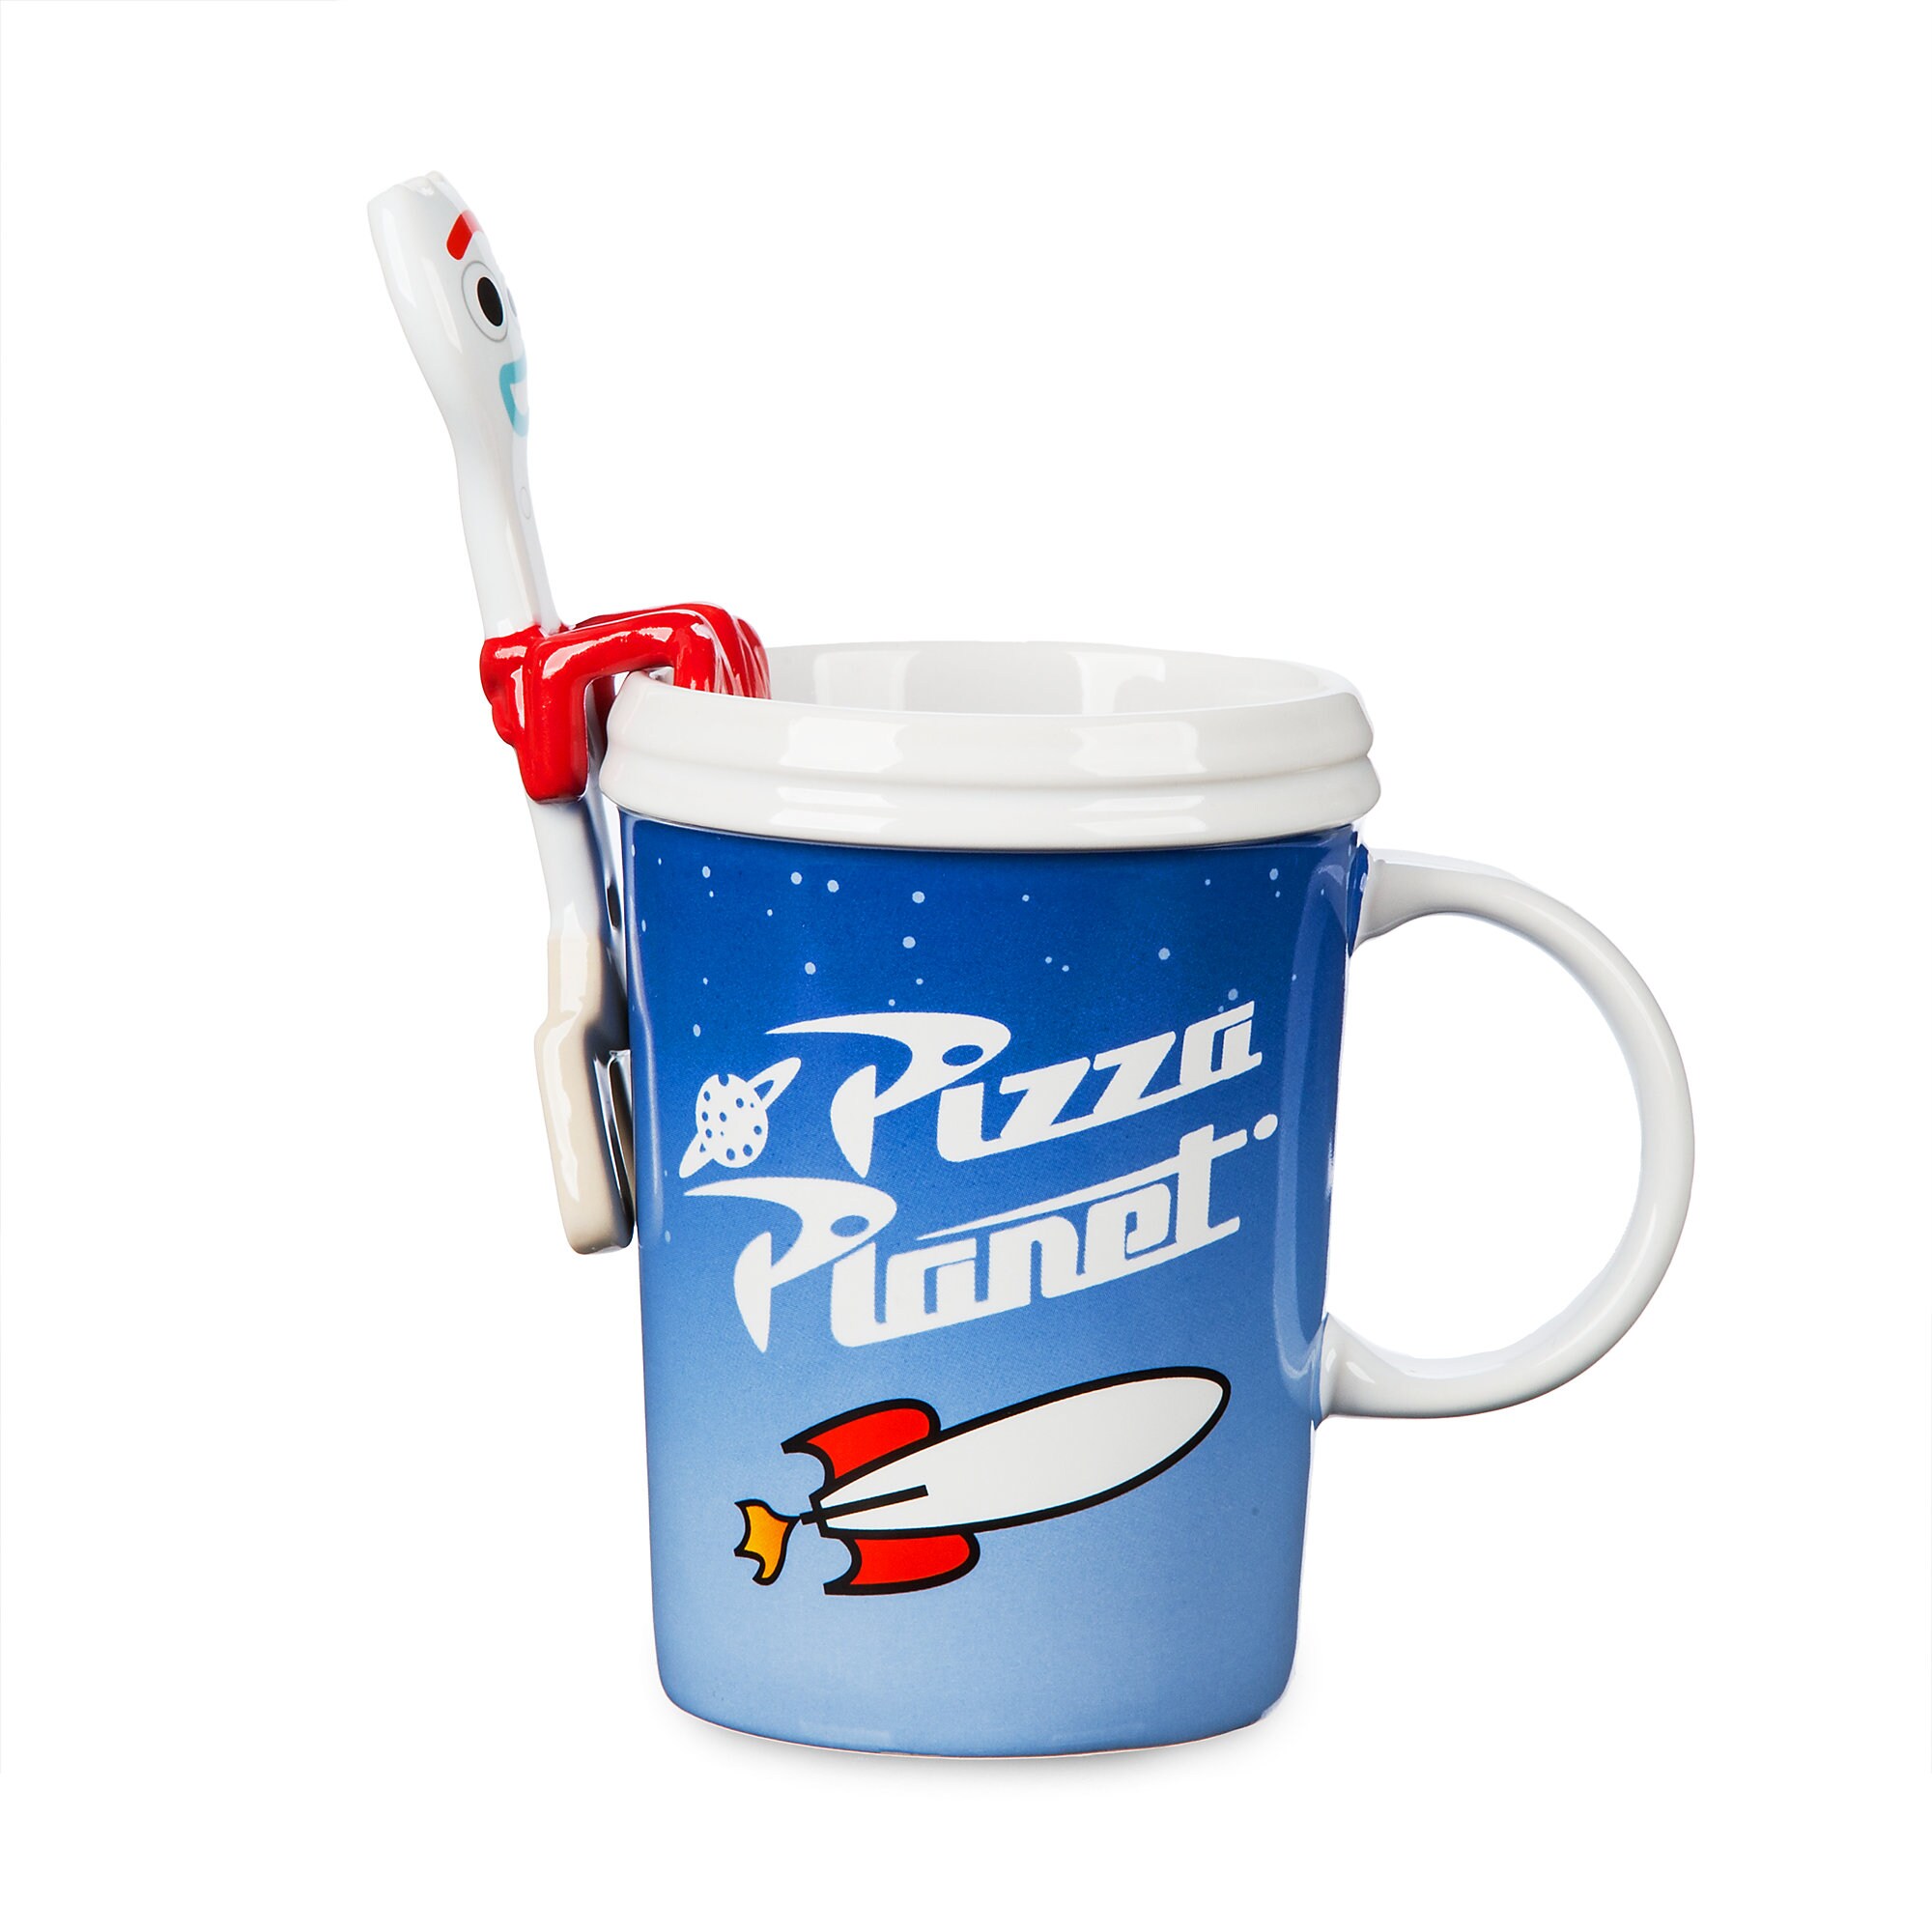 Pizza Planet Mug and Forky Spoon Set - Toy Story 4